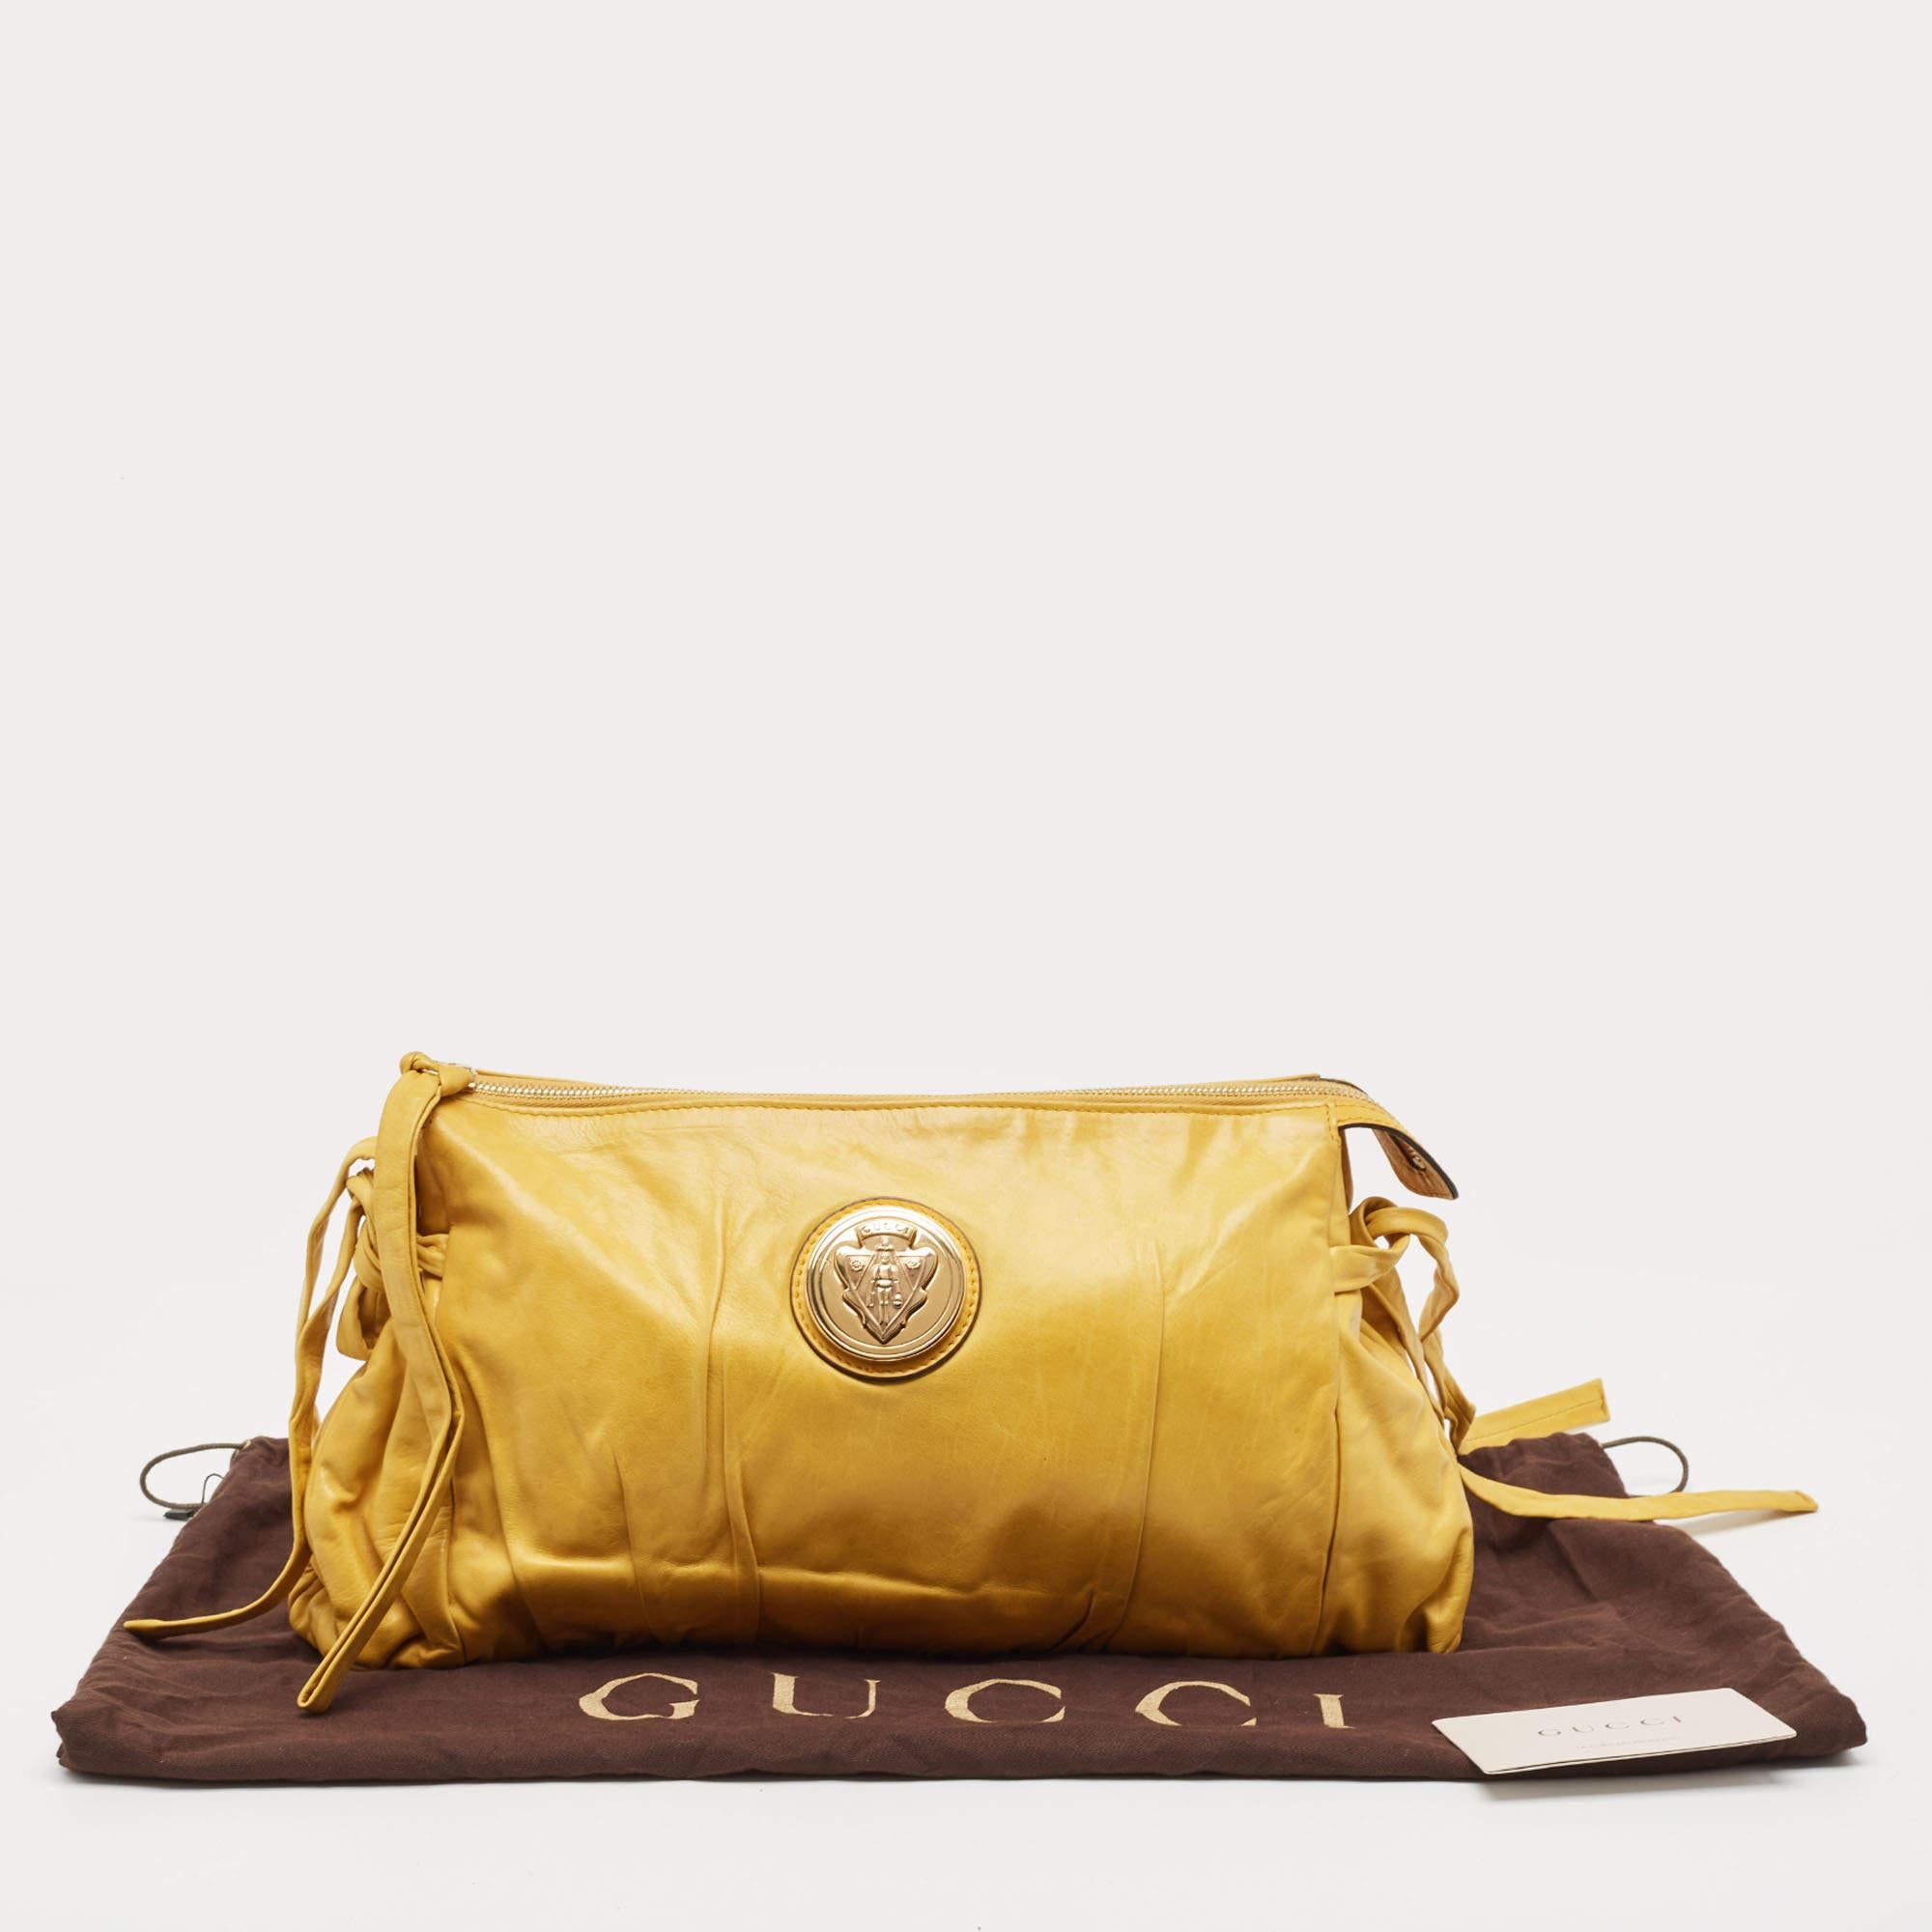 Gucci Yellow Leather Hysteria Clutch For Sale 10